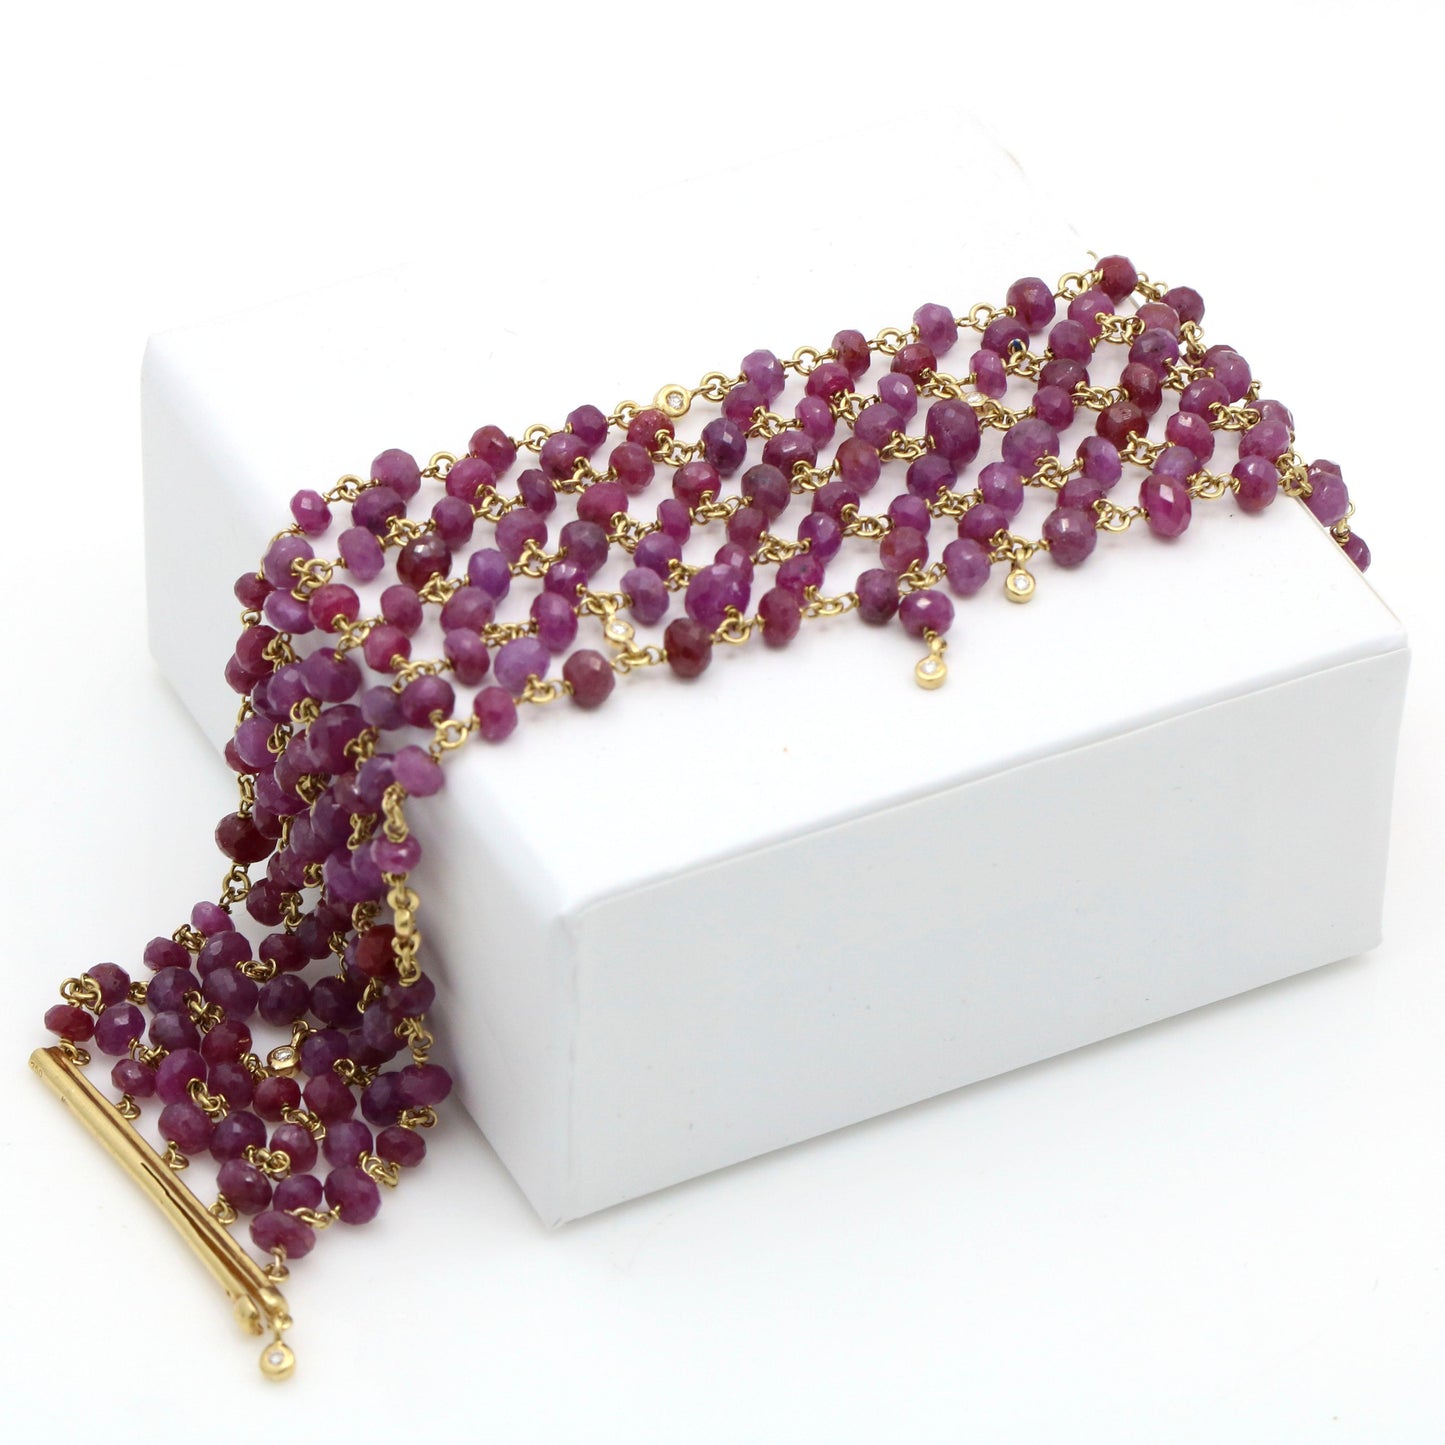 H. Stern Ruby Beads and Diamond Mesh Bracelet in 18k Yellow Gold - 31 Jewels Inc.